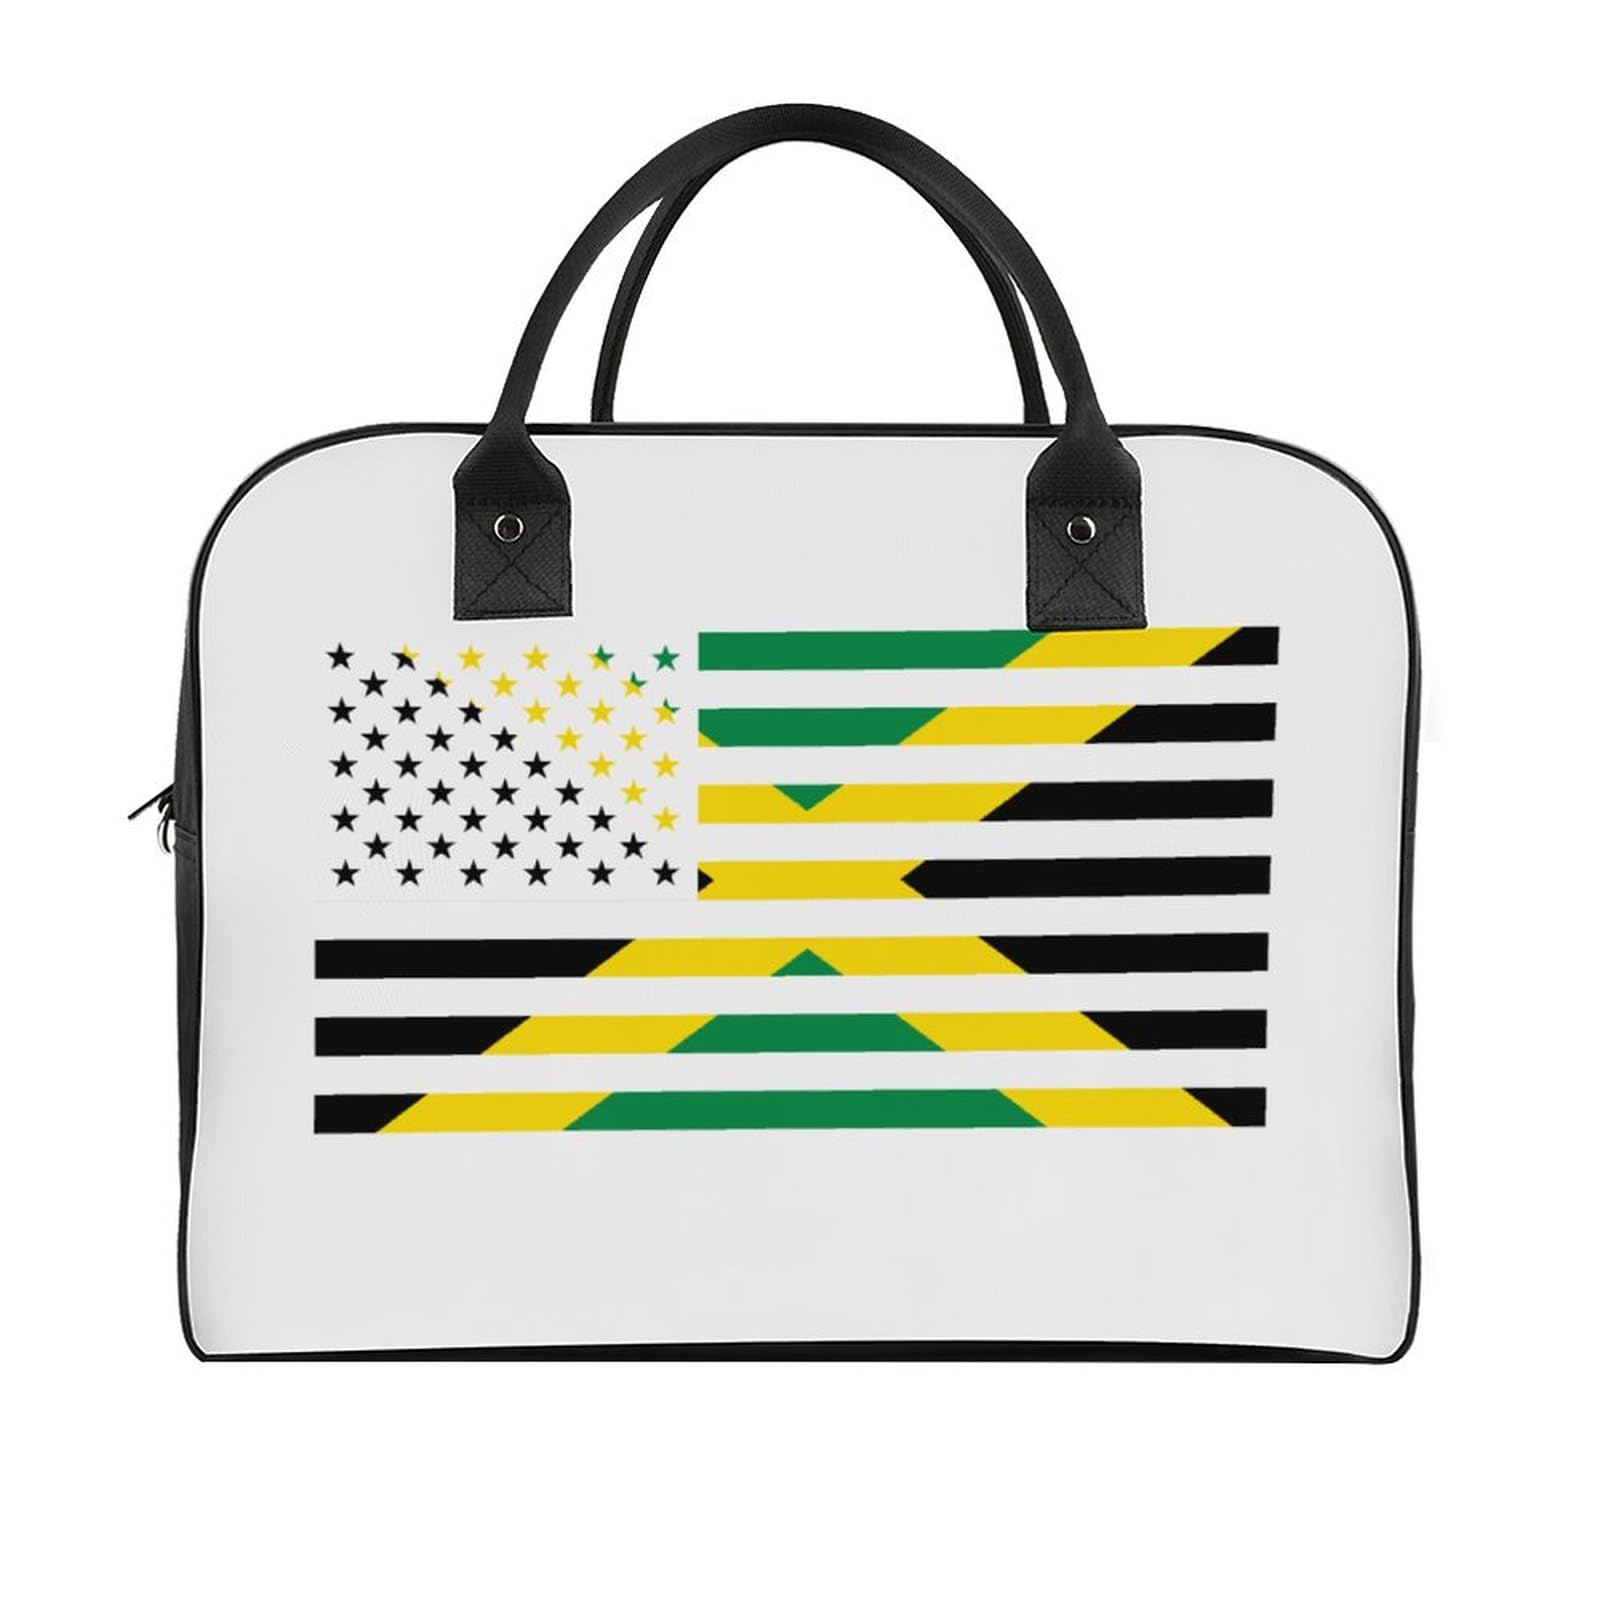 Jamaica American Flag Large Crossbody Bag Laptop Bags Shoulder Handbags Tote with Strap for Travel Office